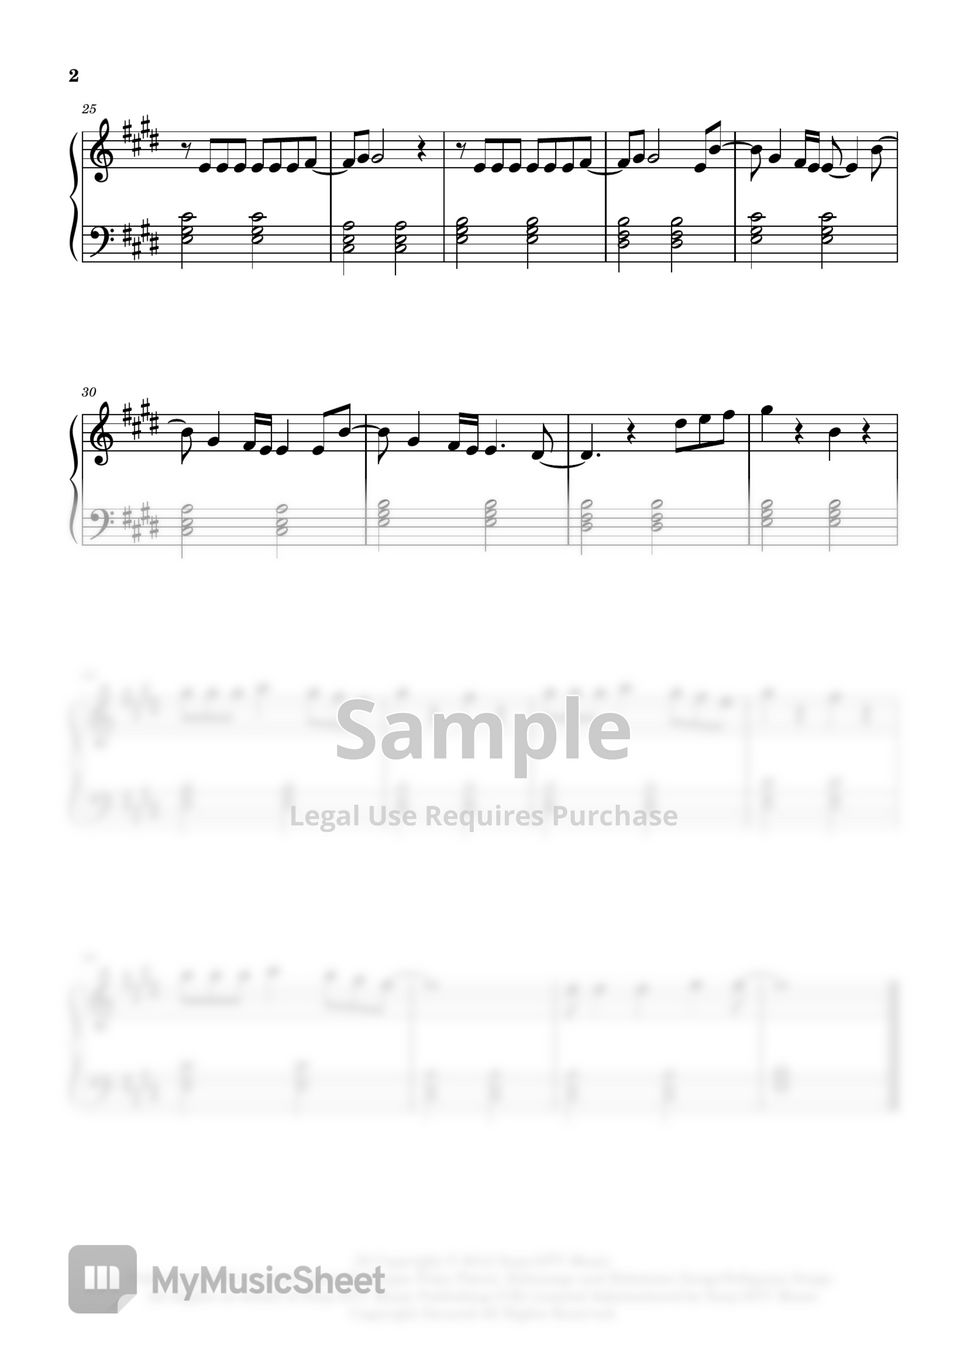 Ed Sheeran - Photograph by Sheet Music For Download